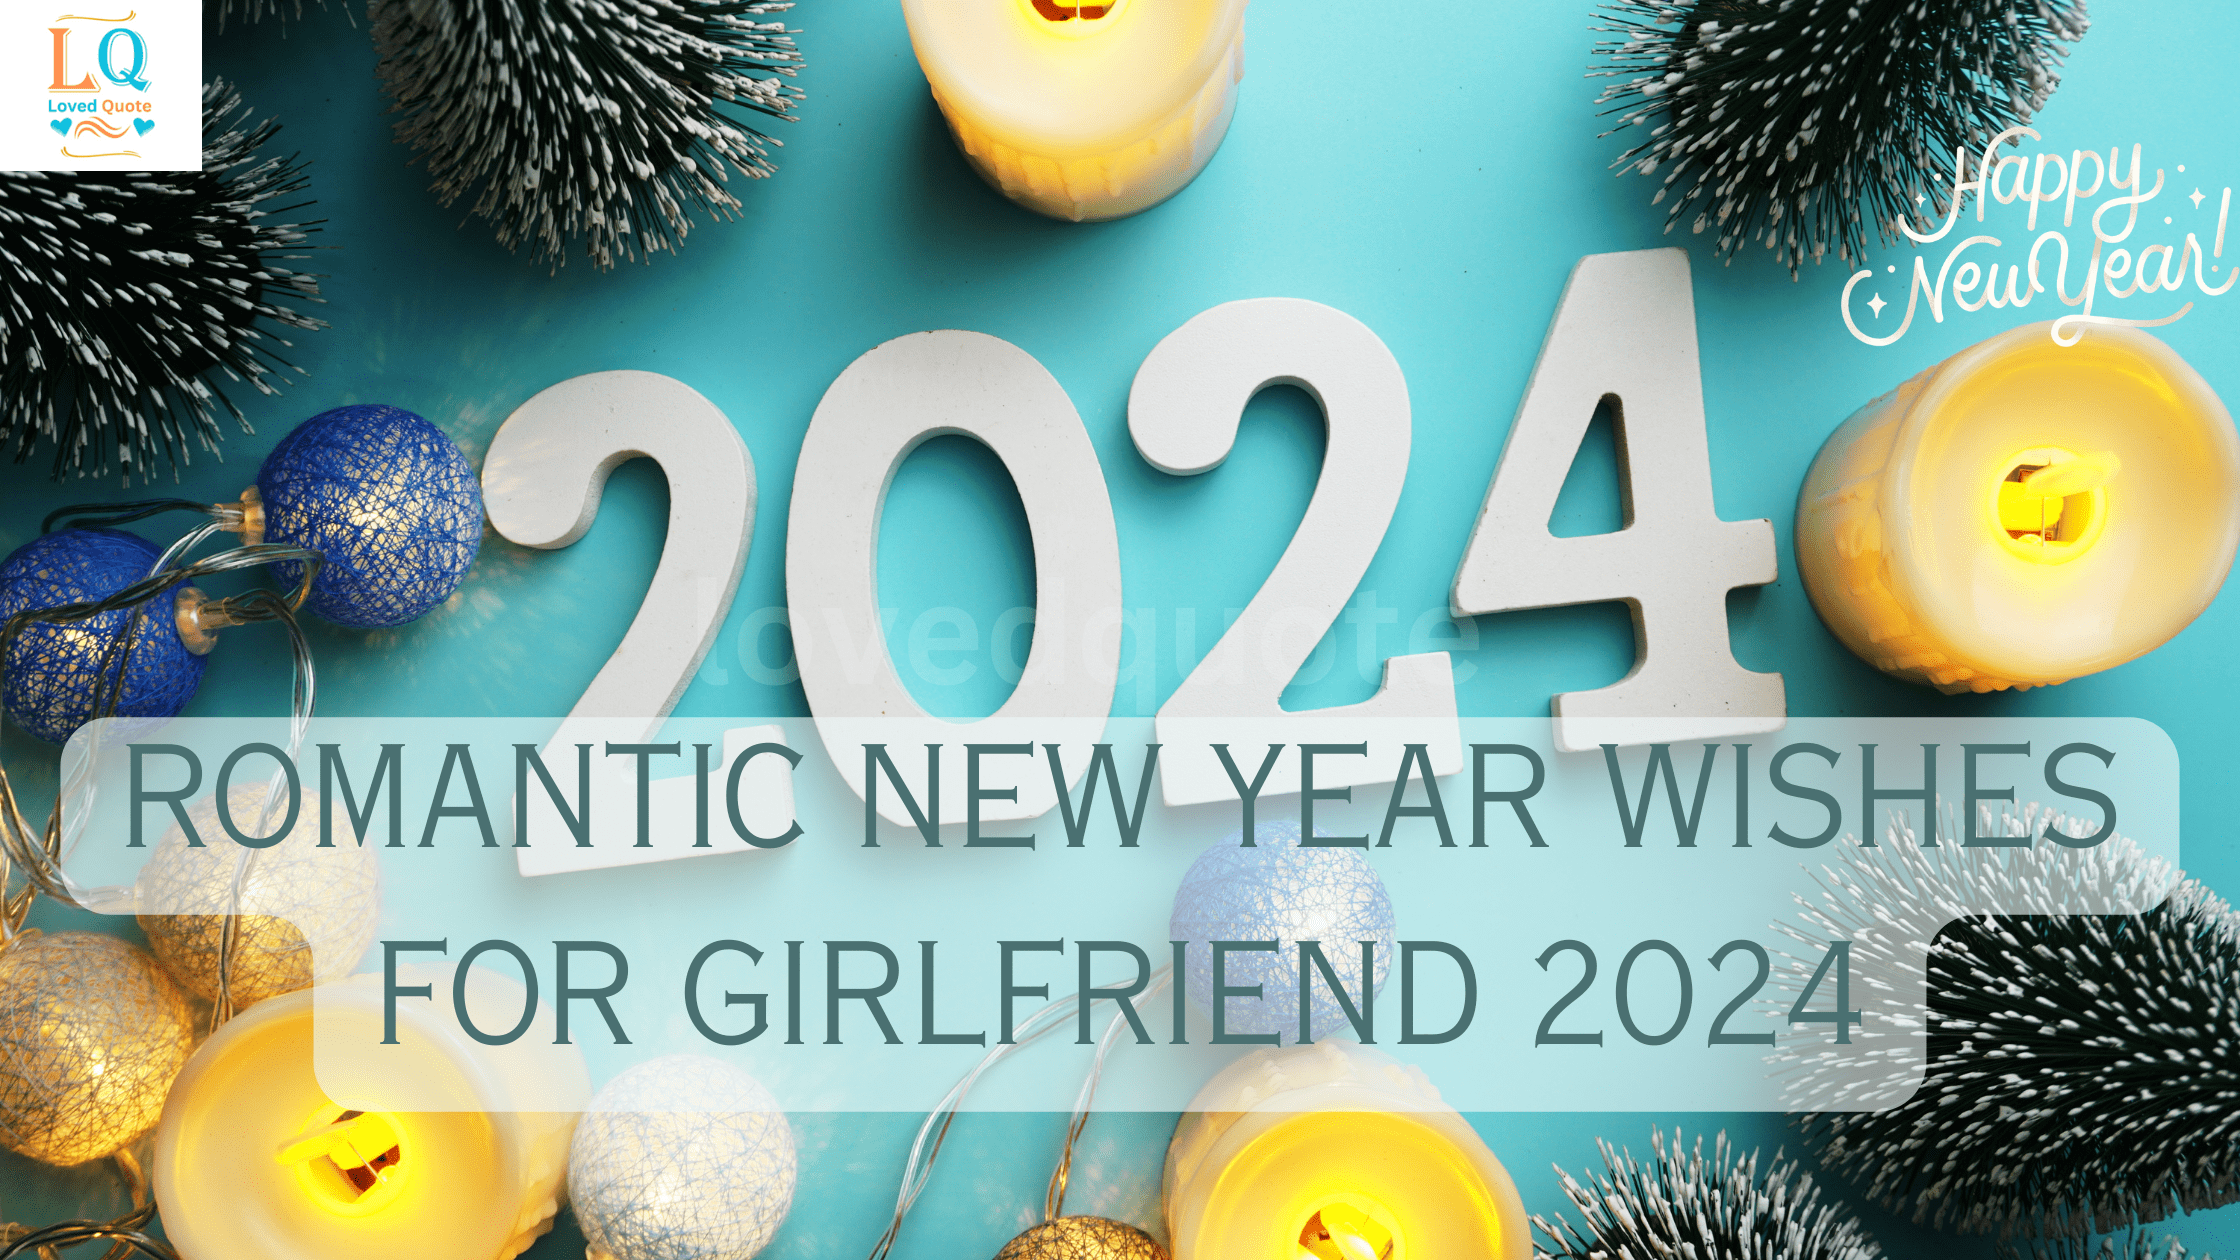 Romantic New Year Wishes for Girlfriend 2024